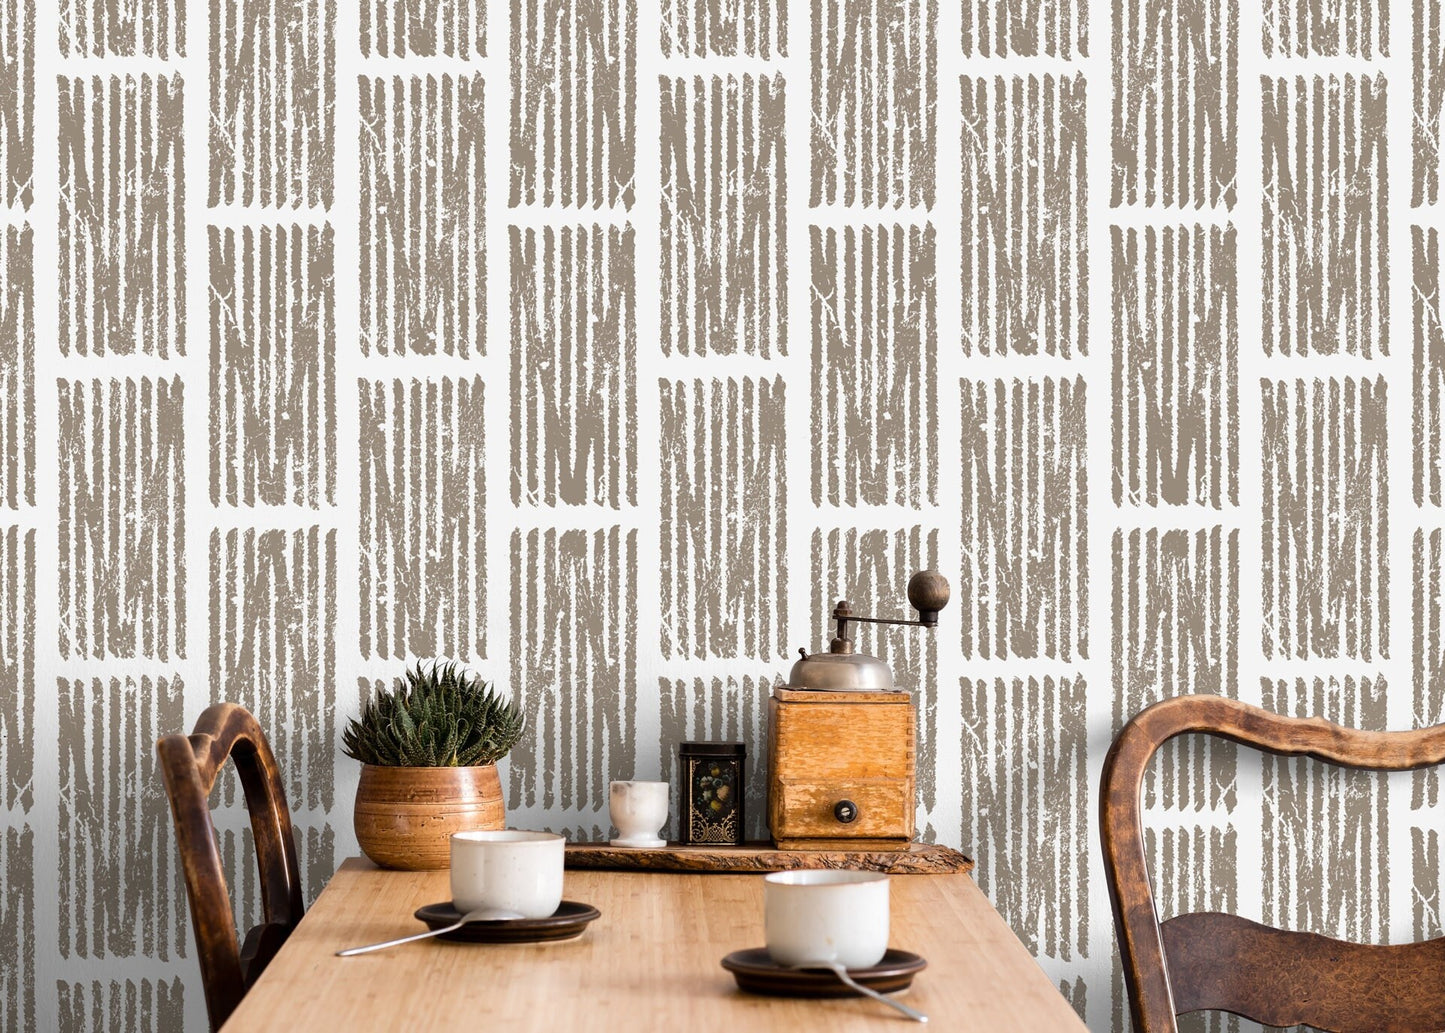 Wallpaper Peel and Stick Wallpaper Removable Wallpaper Home Decor Wall Art Wall Decor Room Decor / Beige and Gray Geometric Wallpaper - C551